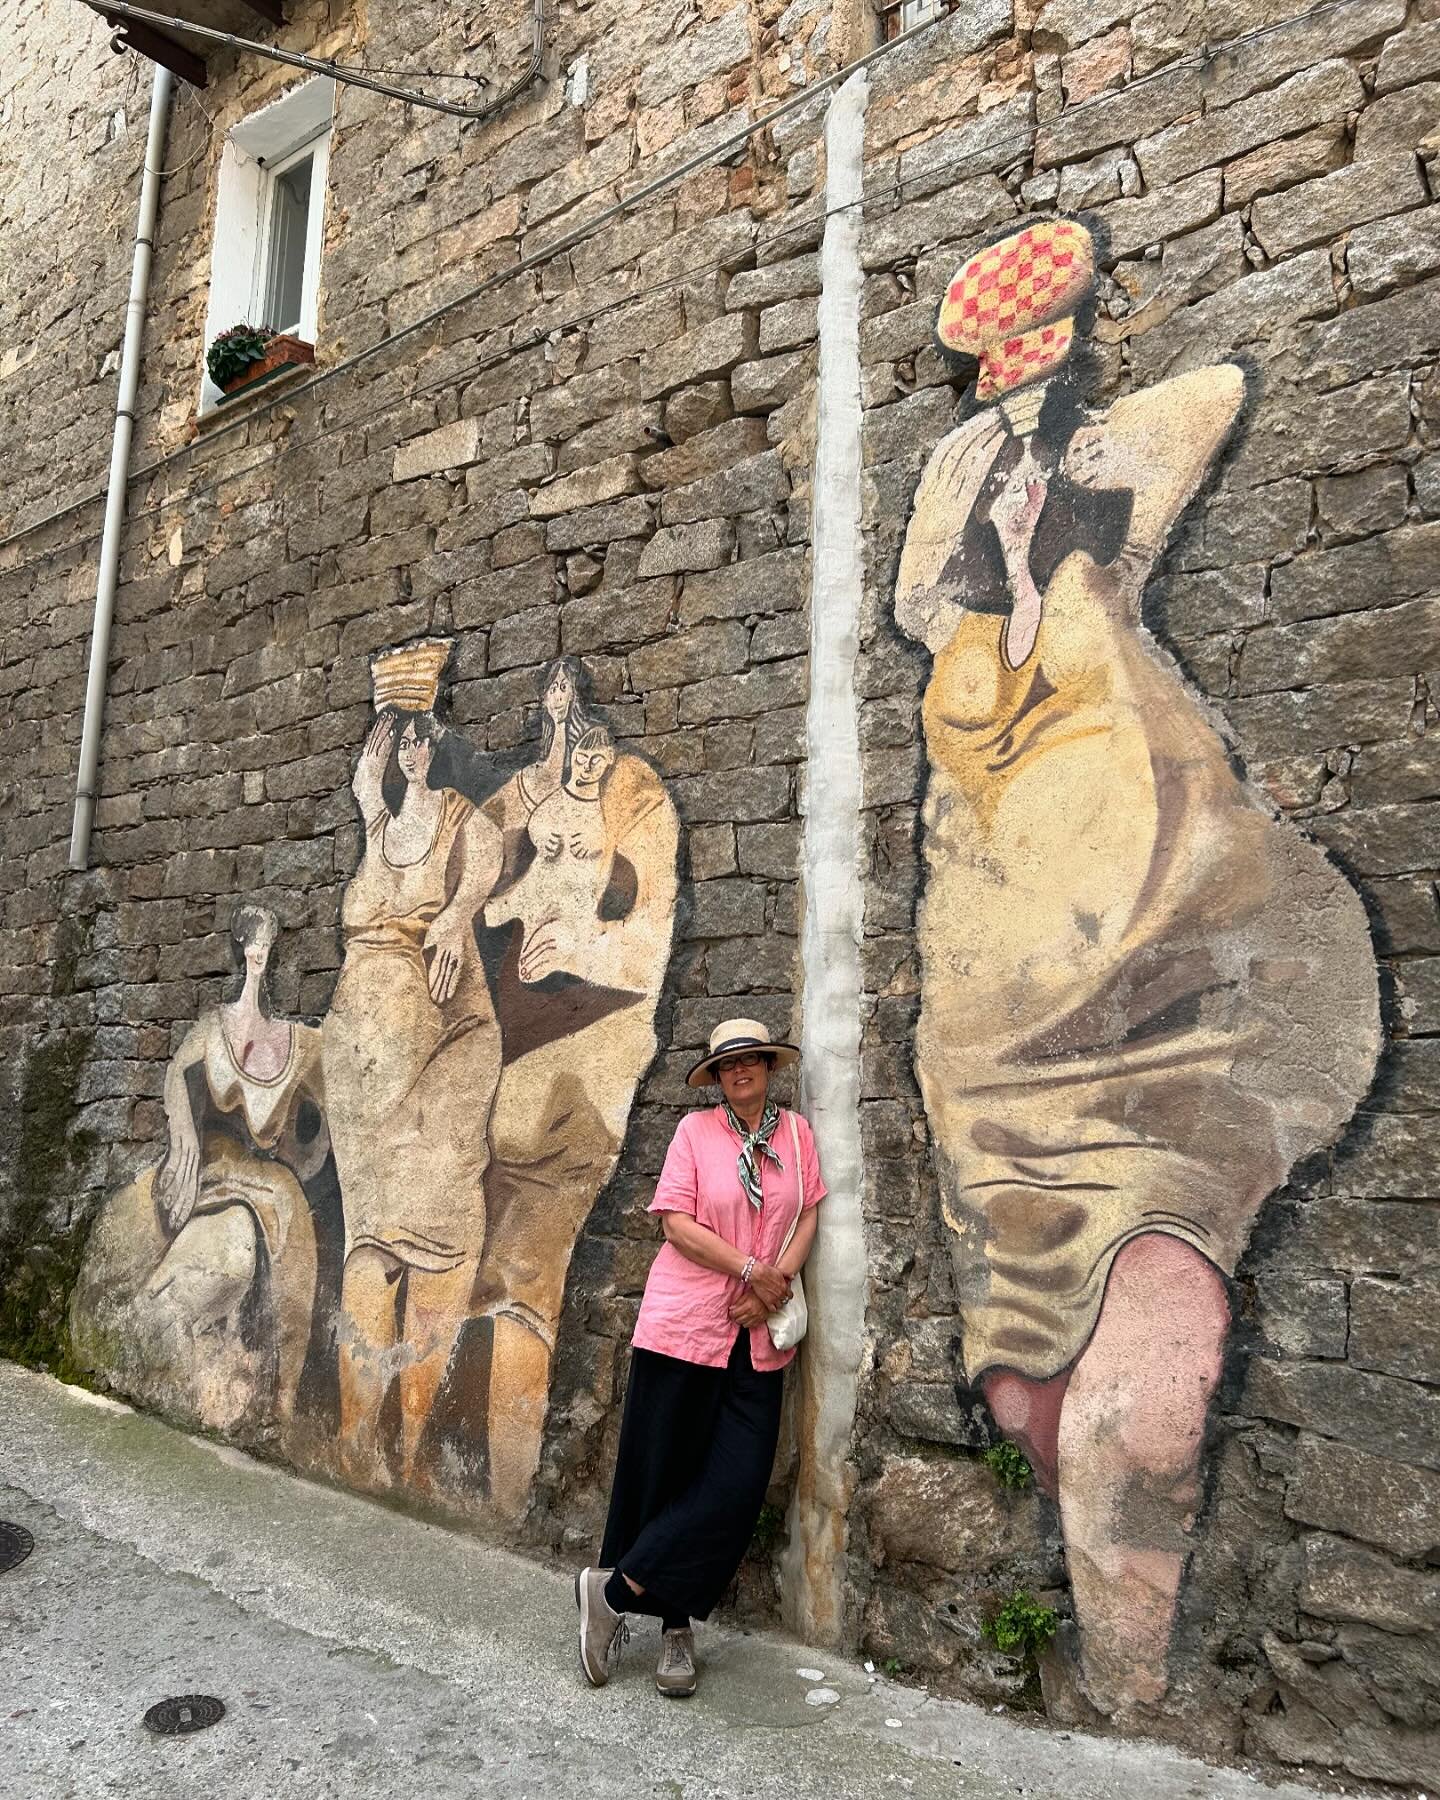 Greetings from Orgosolo Sardinia - known for their murals and for its anti-authoritarian streak. There is a mural around every corner&hellip;and inspiration. Each of these images could inspire a quilt! 

#quiltinspiration #orgosolomurales